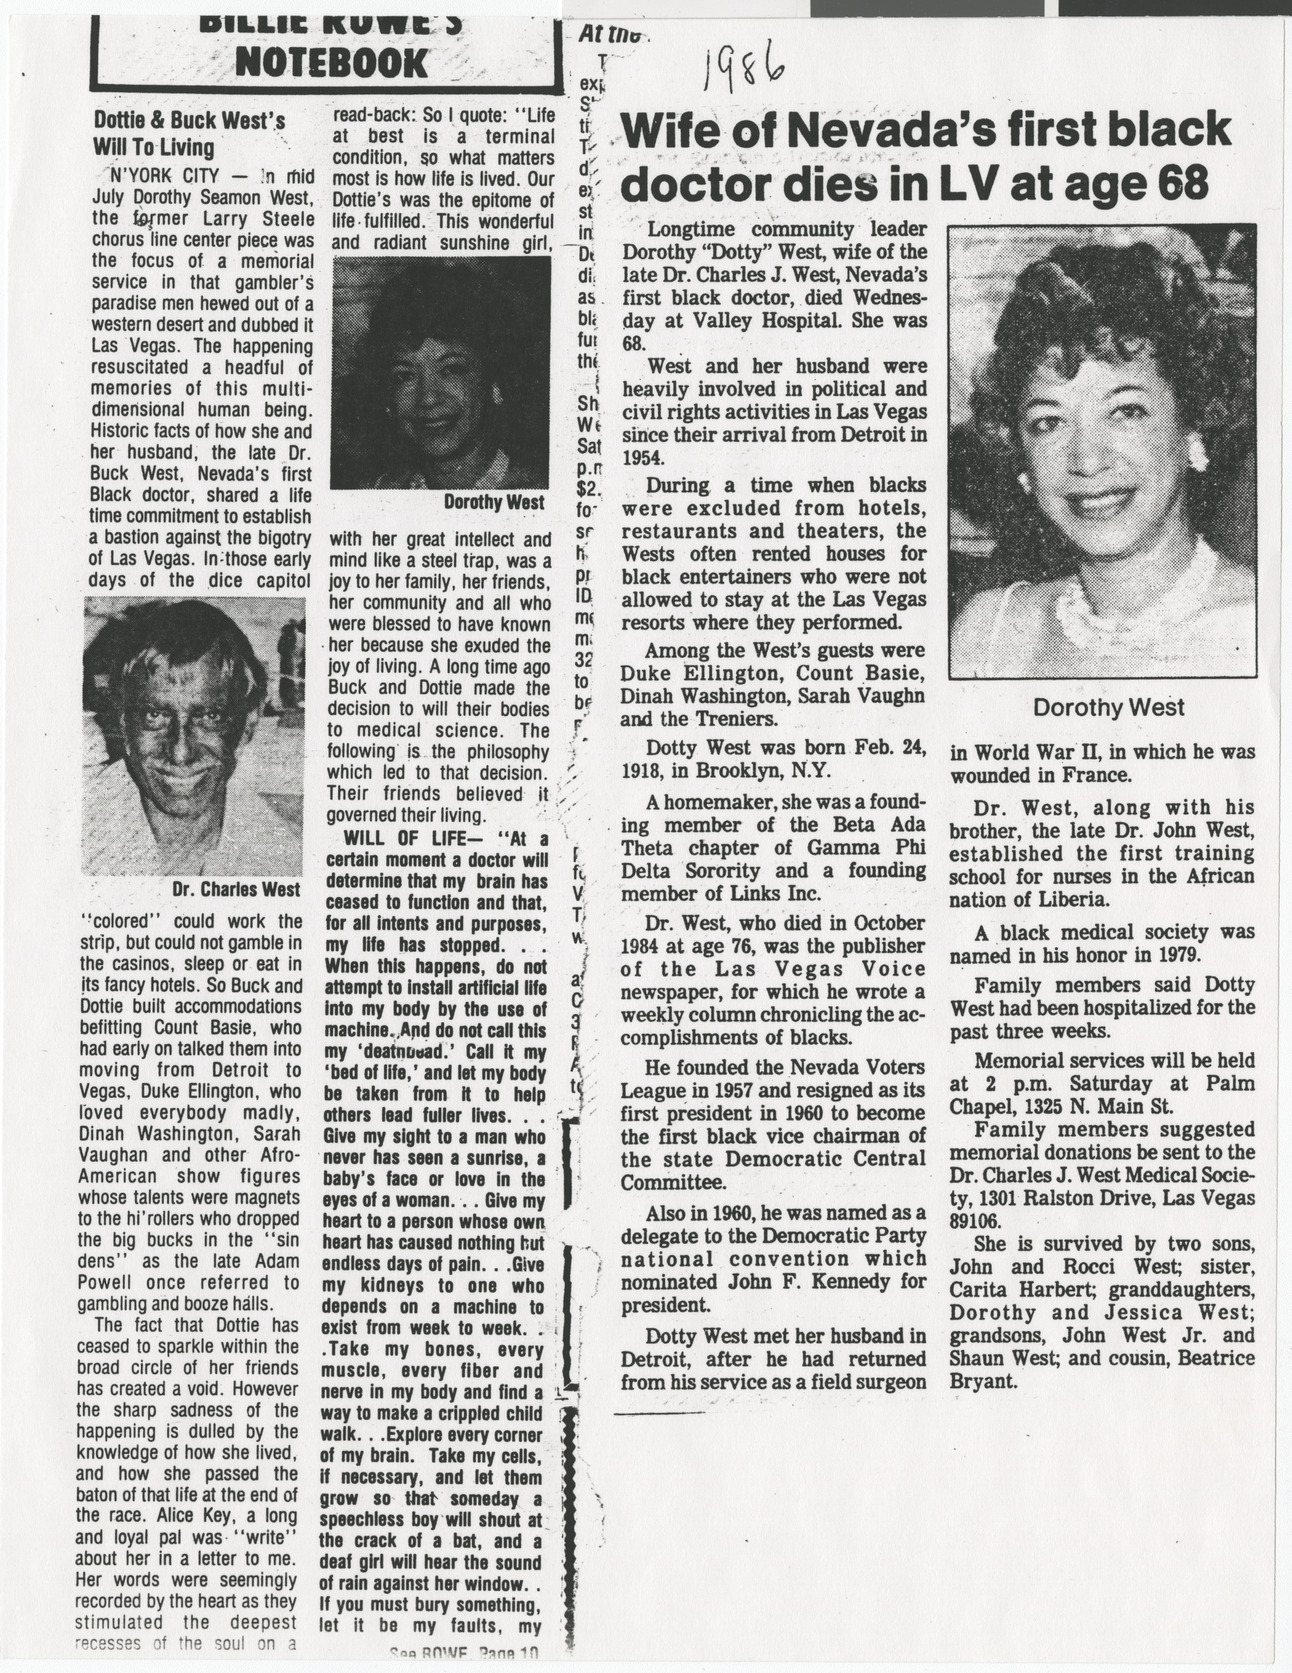 Newspaper clippings (copy), Billie Rowe's Notebook, Dottie & Buck West's Will to Living, and Wife of Nevada's first black doctor dies in LV at age 68, publication unknown, 1986